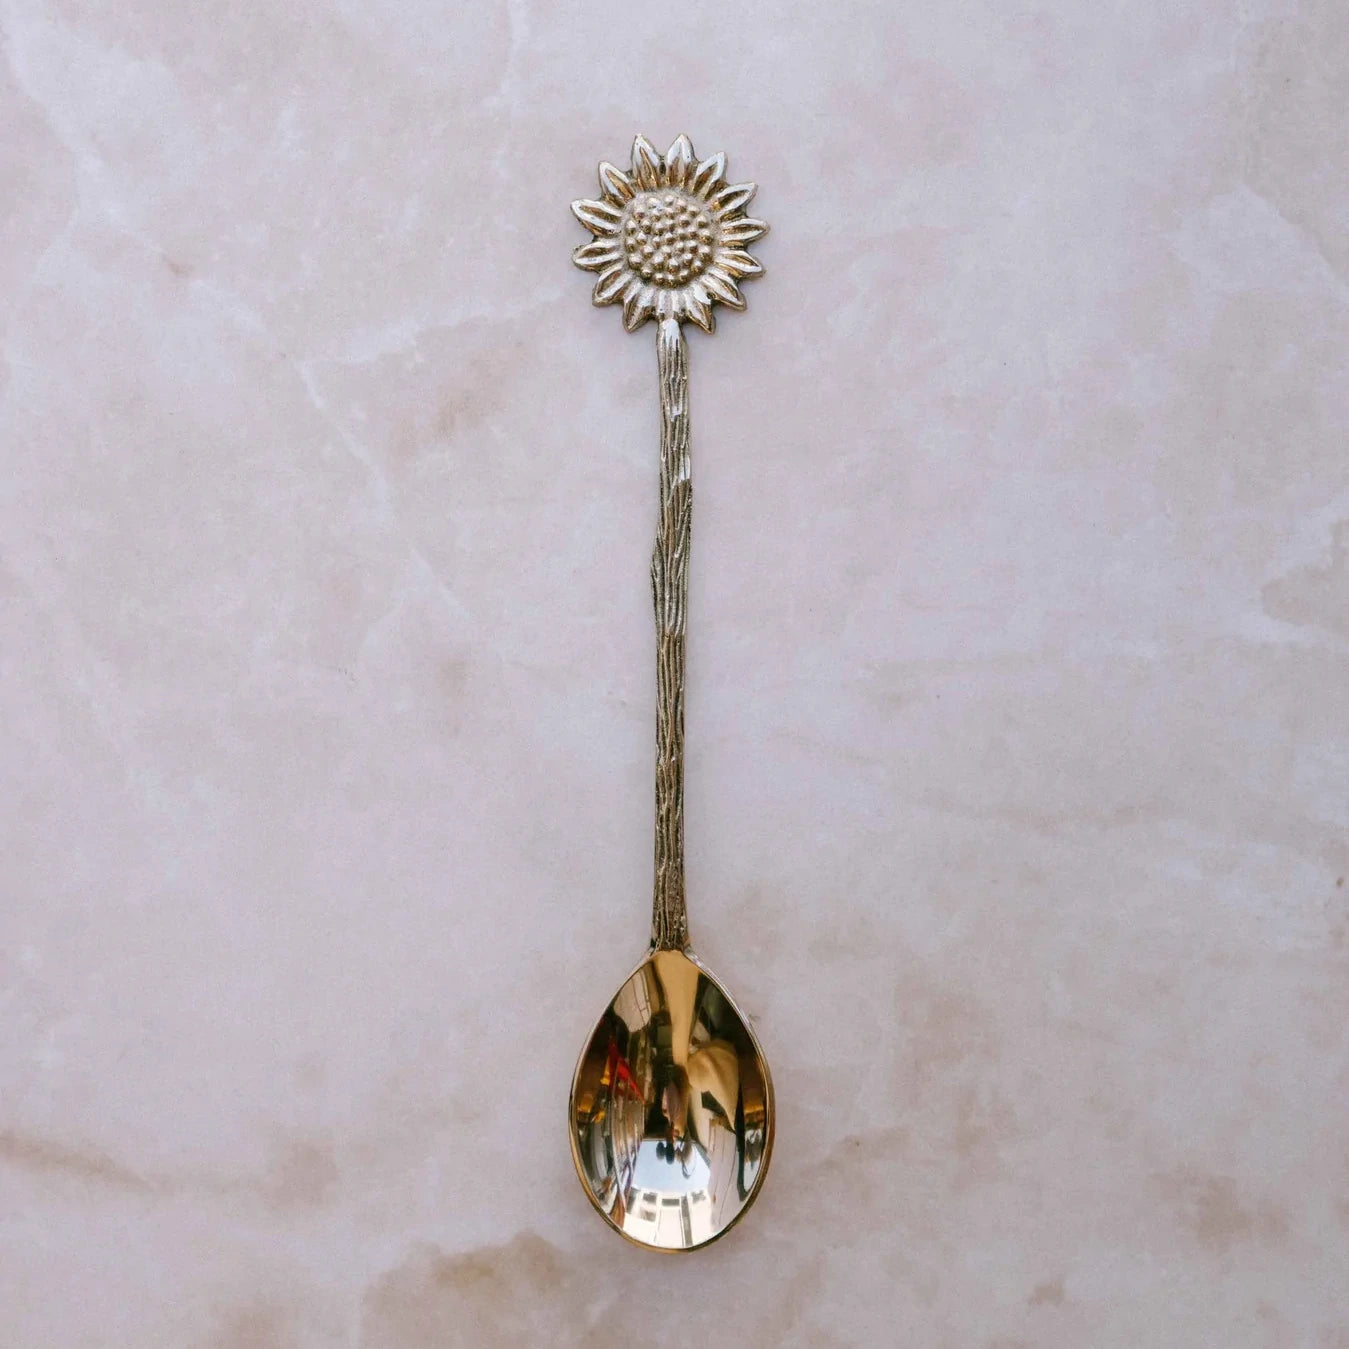 Brass Dessert Spoons by The Wholesome Store - Sunflower